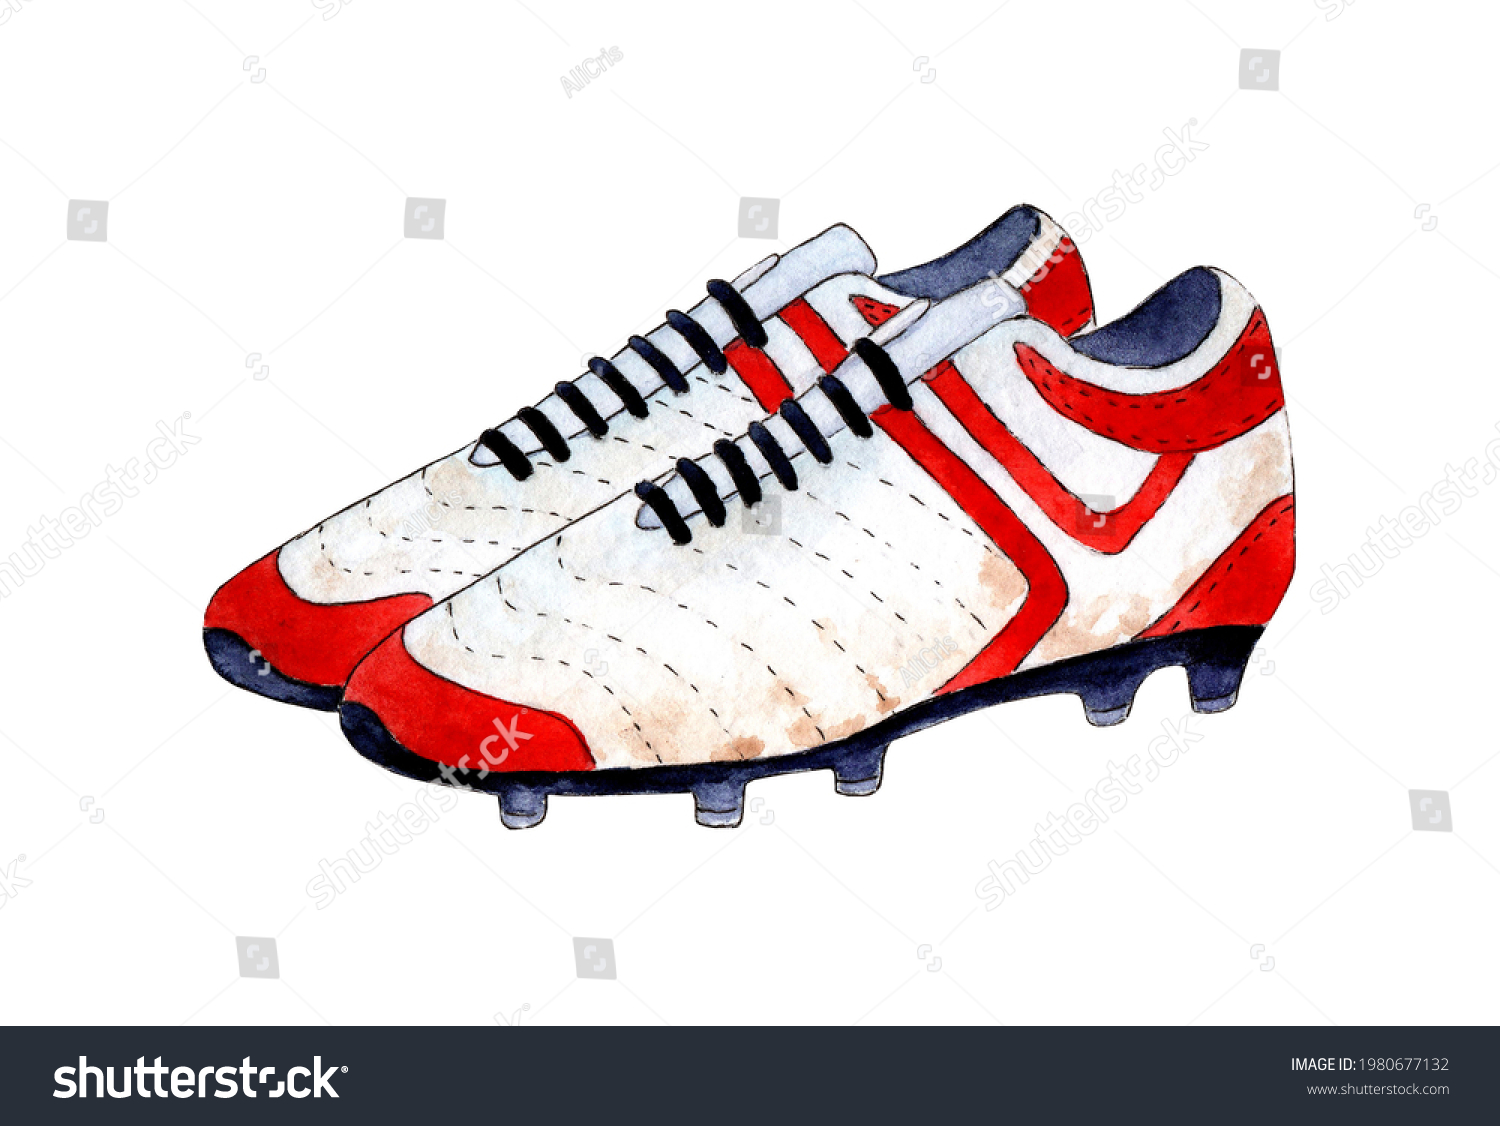 2,486 Rugby boots Images, Stock Photos & Vectors | Shutterstock